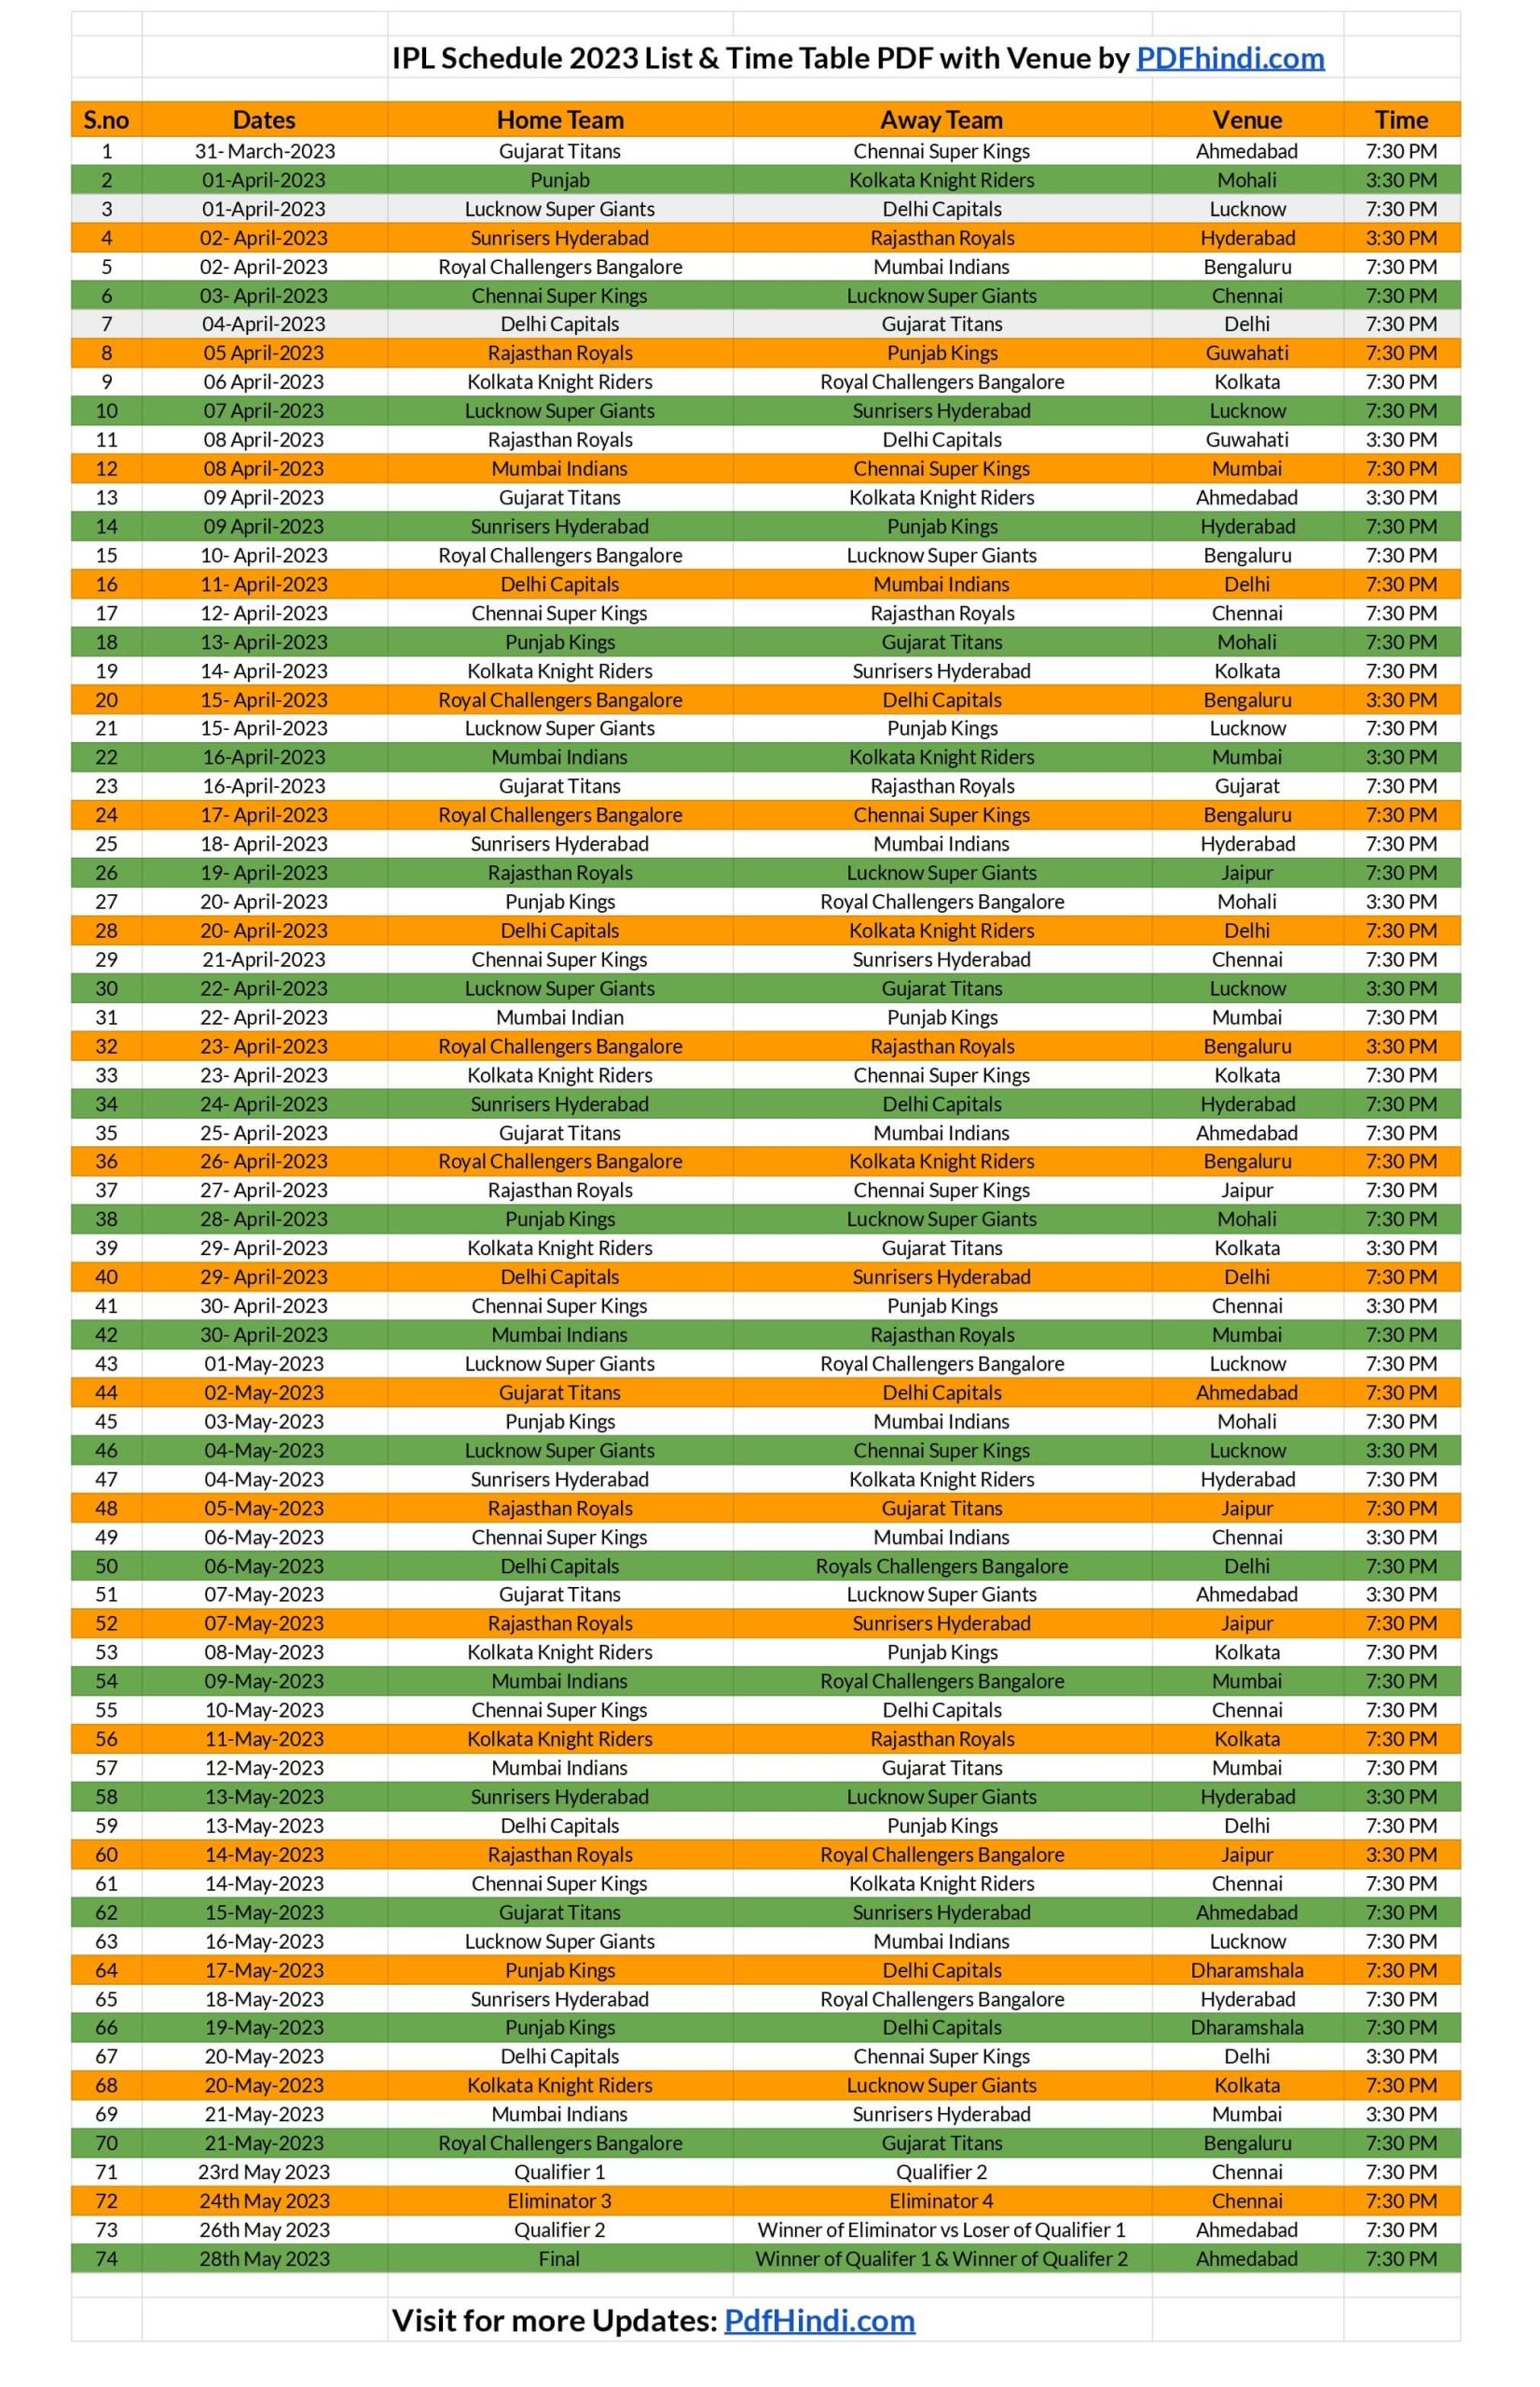 IPL Schedule 2023 Matches List & Time Table PDF Images Hd Pics